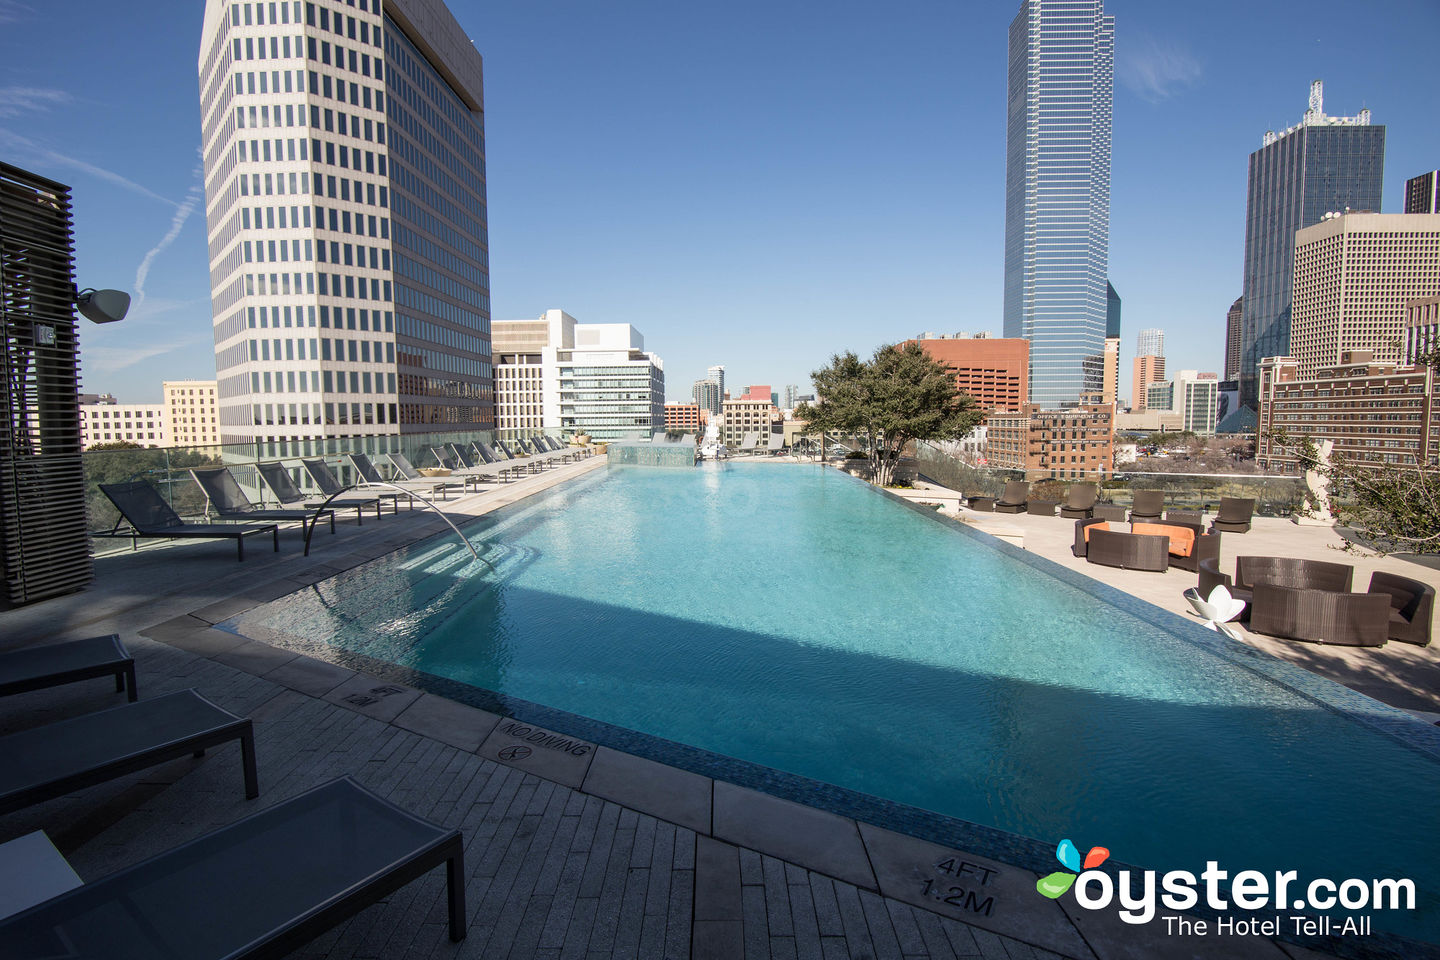 Omni Dallas Hotel Review What To REALLY Expect If You Stay